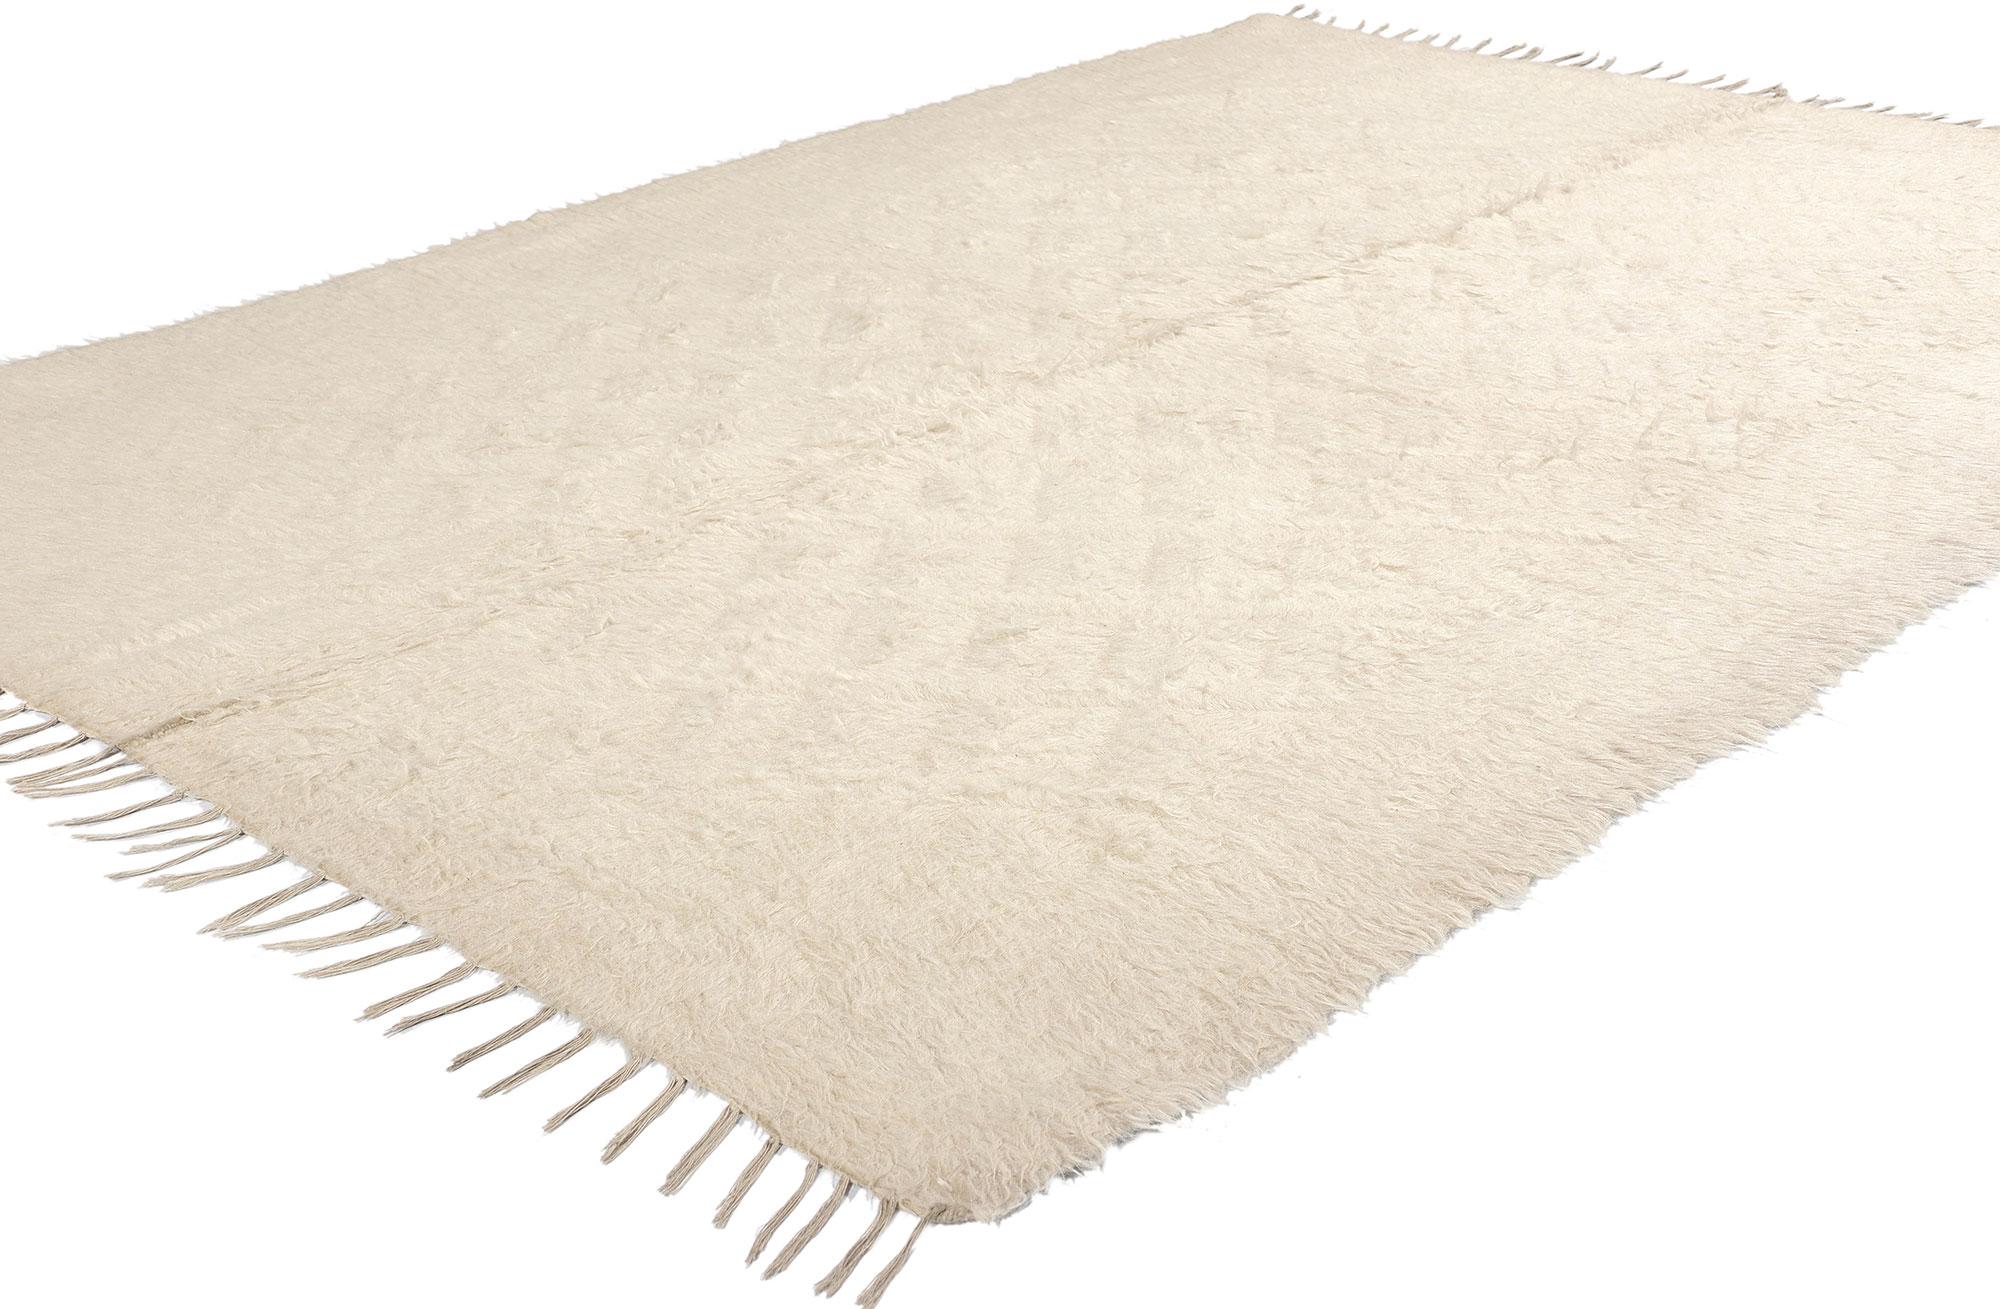 52108 Vintage Turkish Angora Wool Rug, 05'01 x 07'01. Long-haired Turkish Angora wool rugs are esteemed for their plush texture, lasting resilience, and intricate designs, crafted from the wool of Angora goats mainly found in Turkey's Anatolian